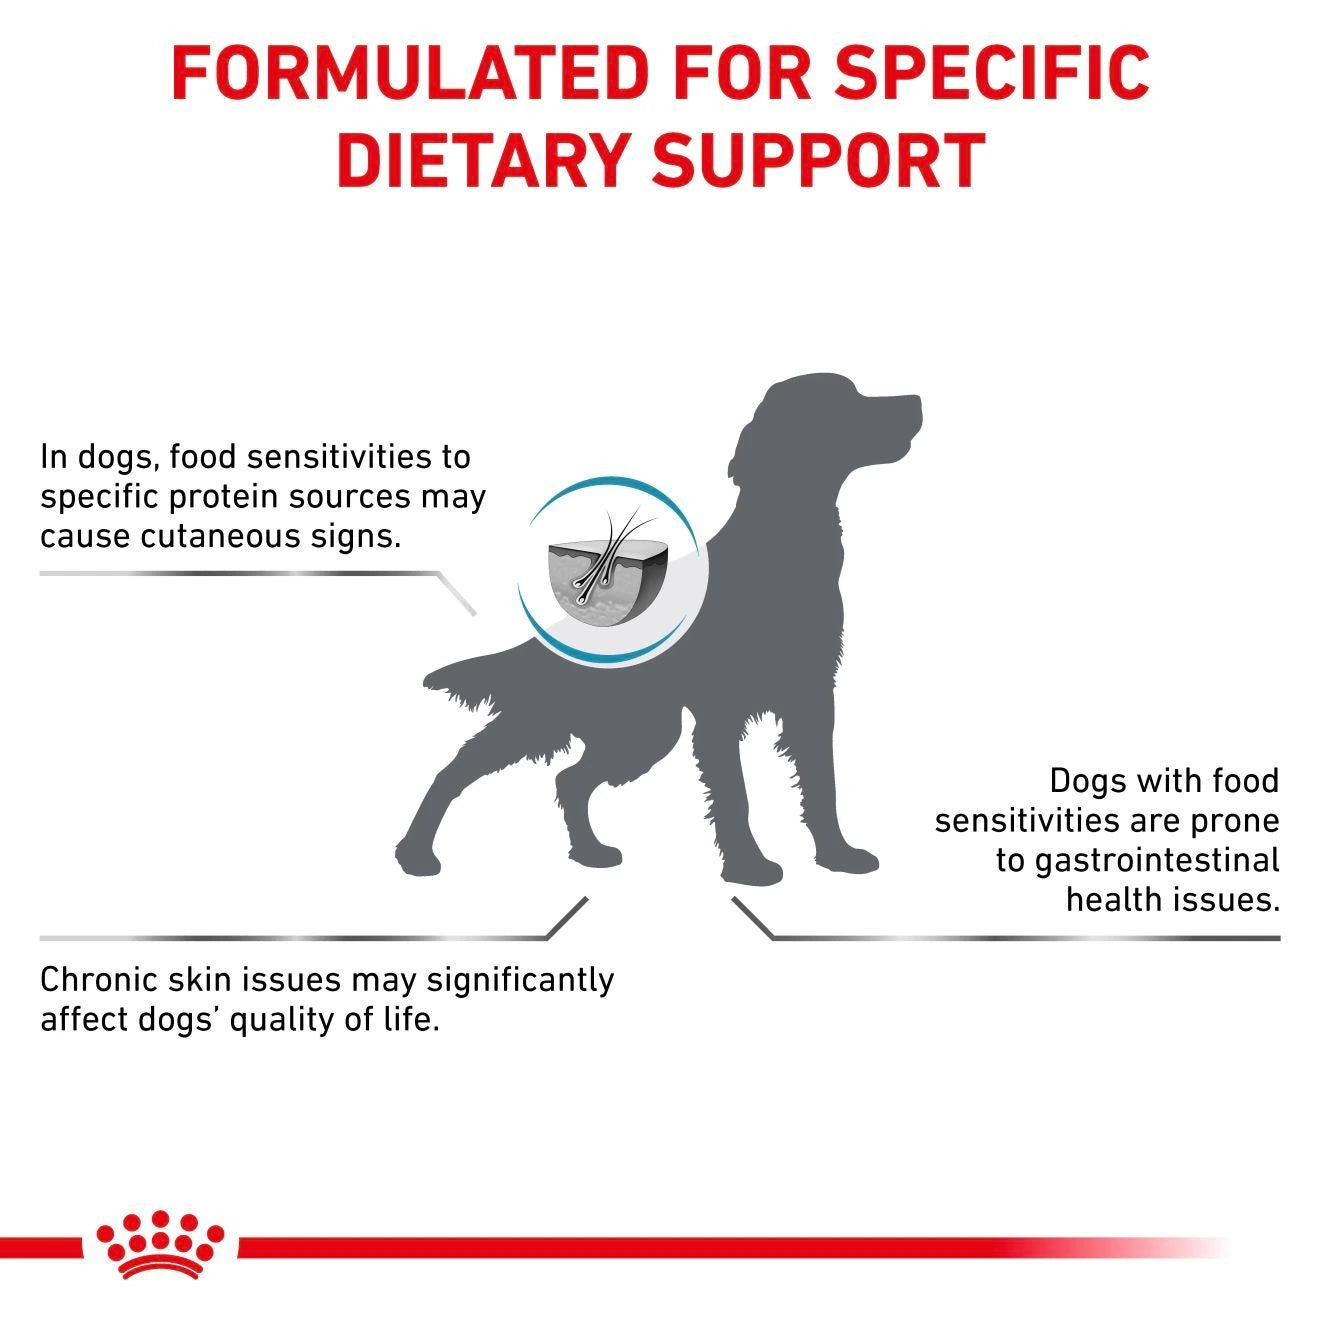 Royal Canin - Canine Hypoallergenic Adult is formulated for food sensitivities